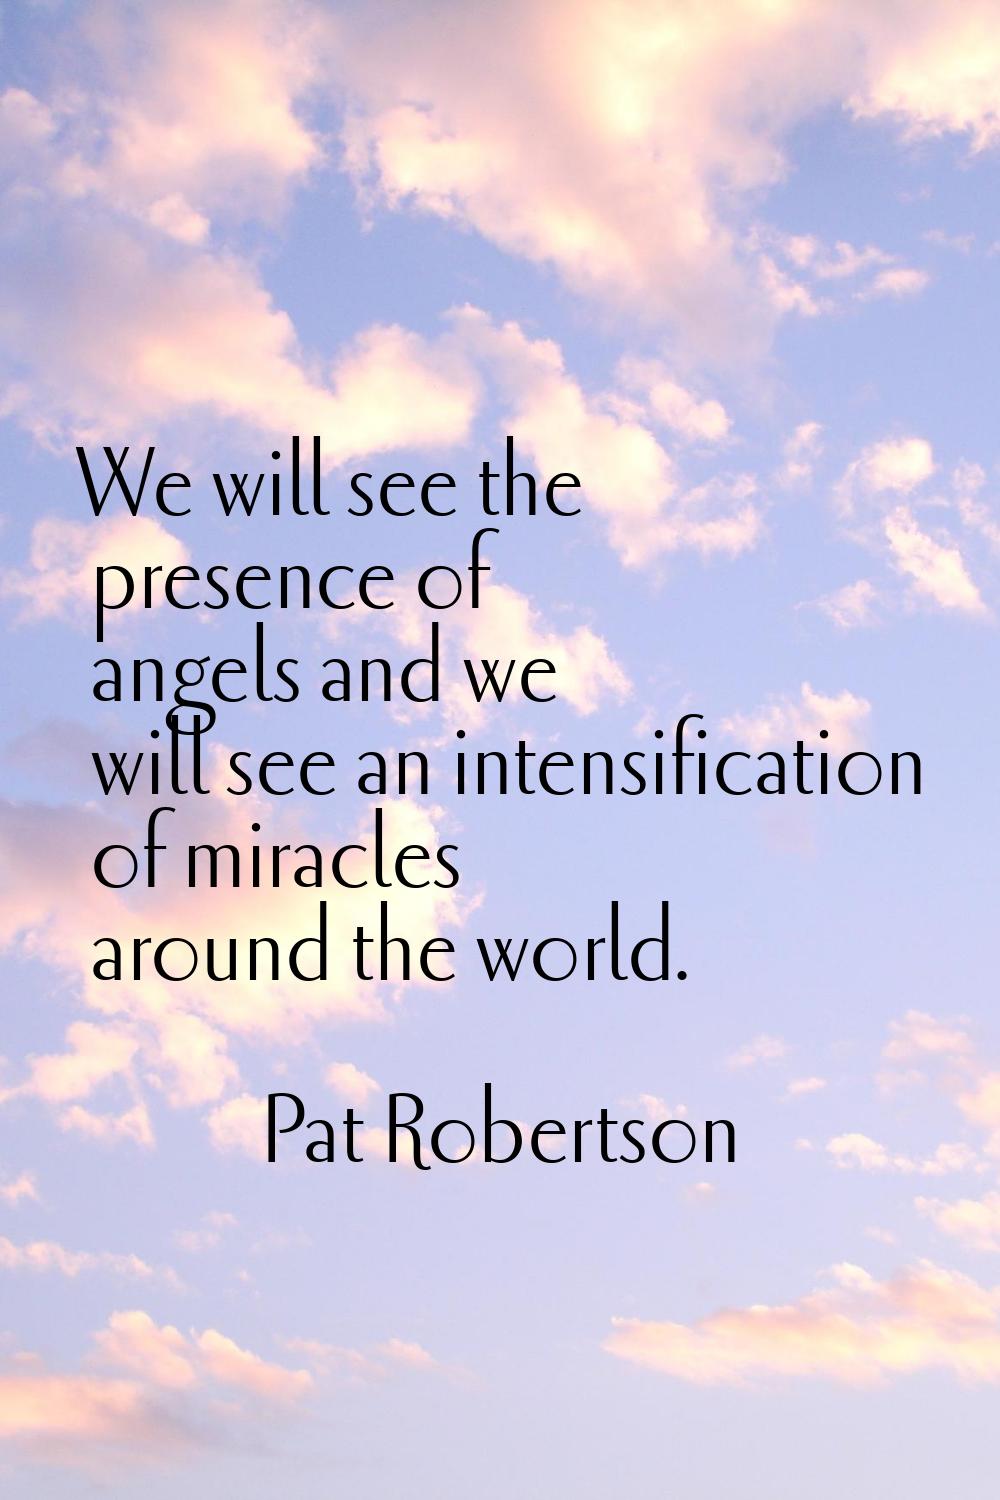 We will see the presence of angels and we will see an intensification of miracles around the world.